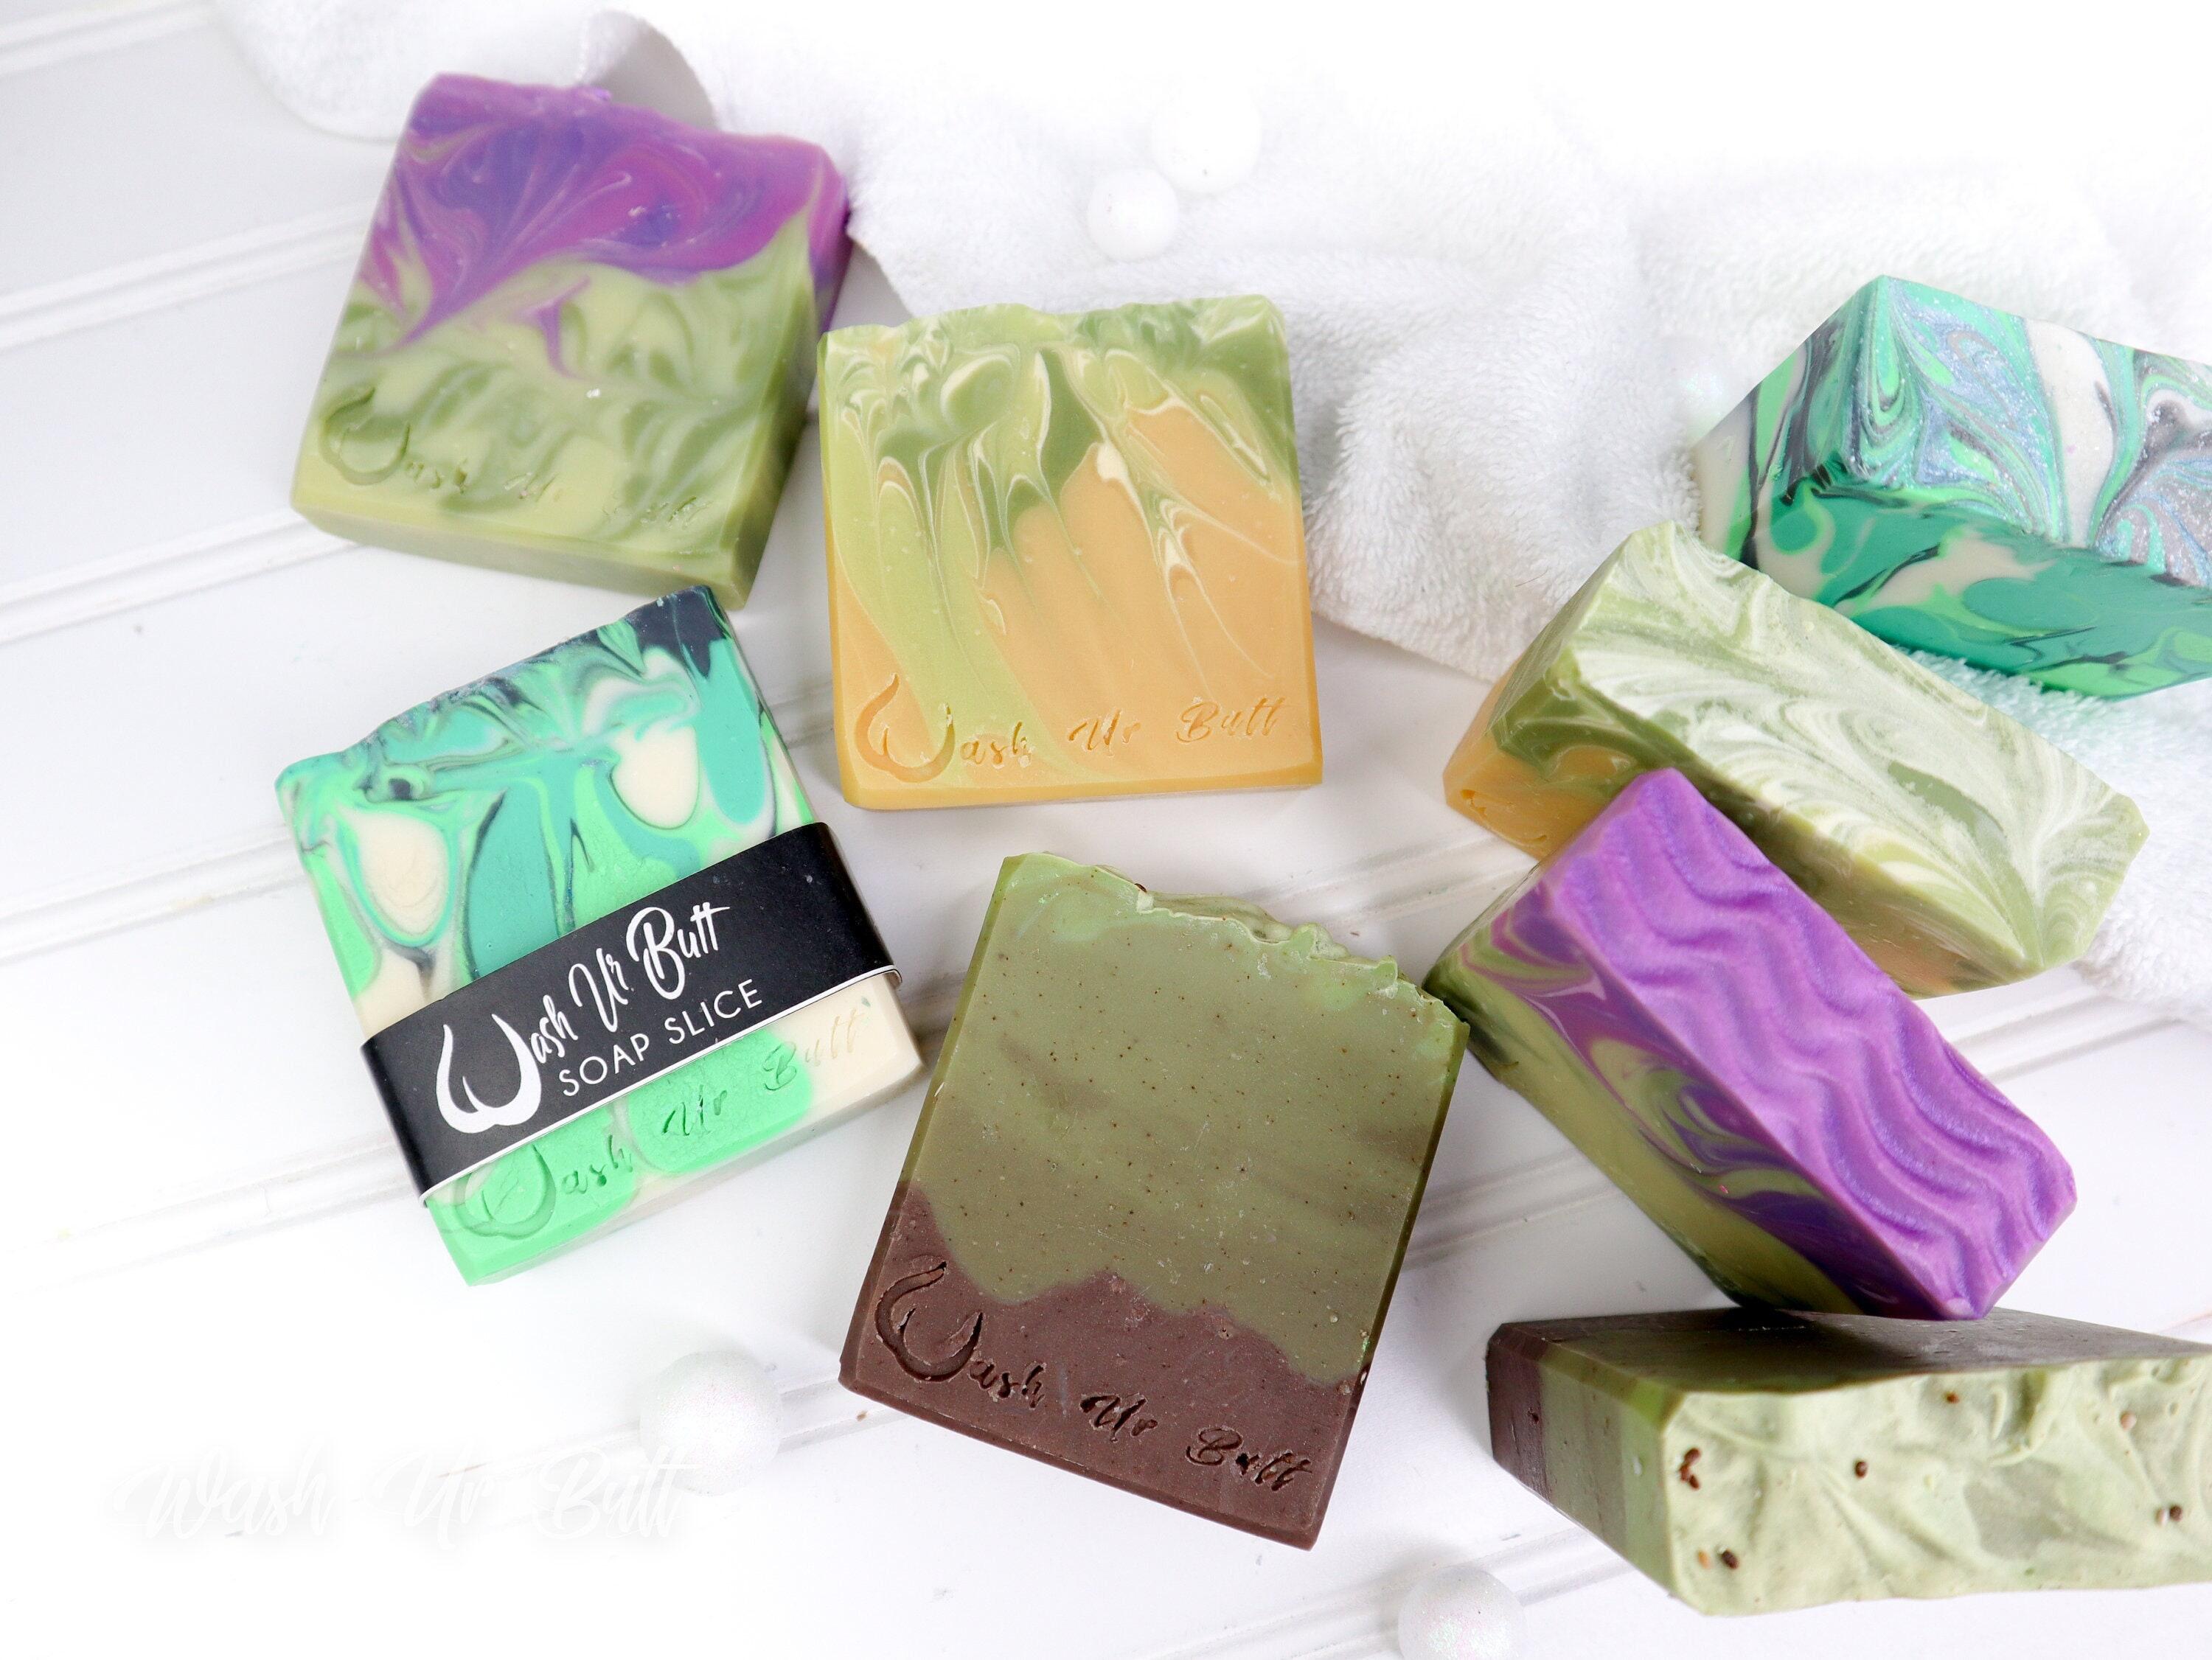 A collection of handmade soaps by Wash Ur Butt Soap Co.